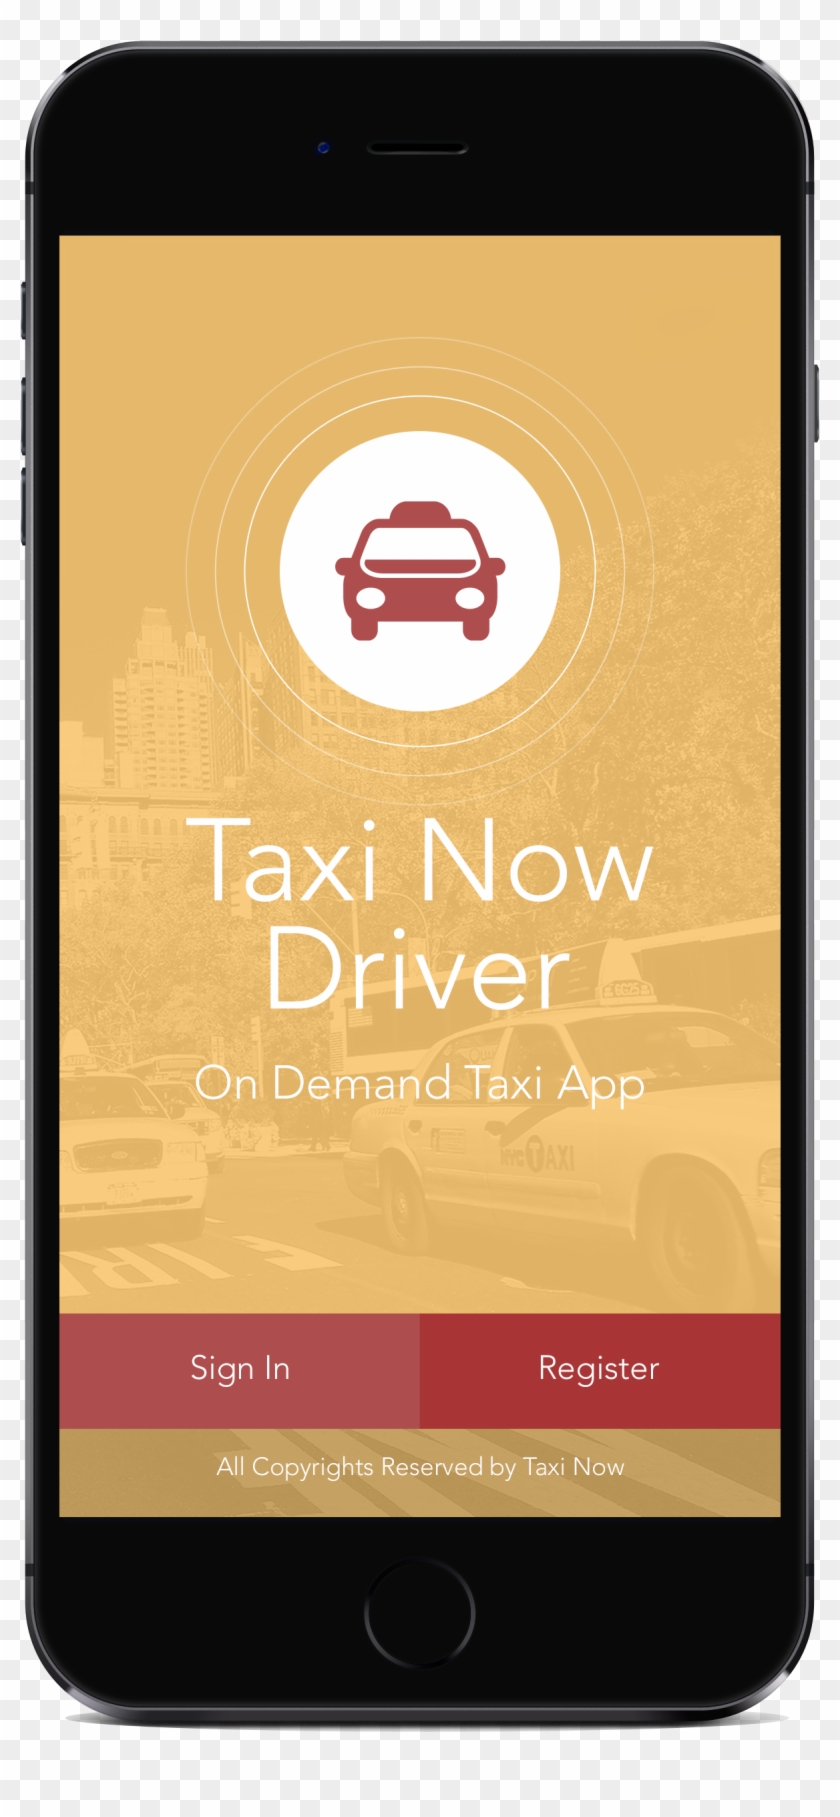 Android Source And Ios Source Code For Starting A Taxi - Android Taxi App Source Code Clipart #1471797